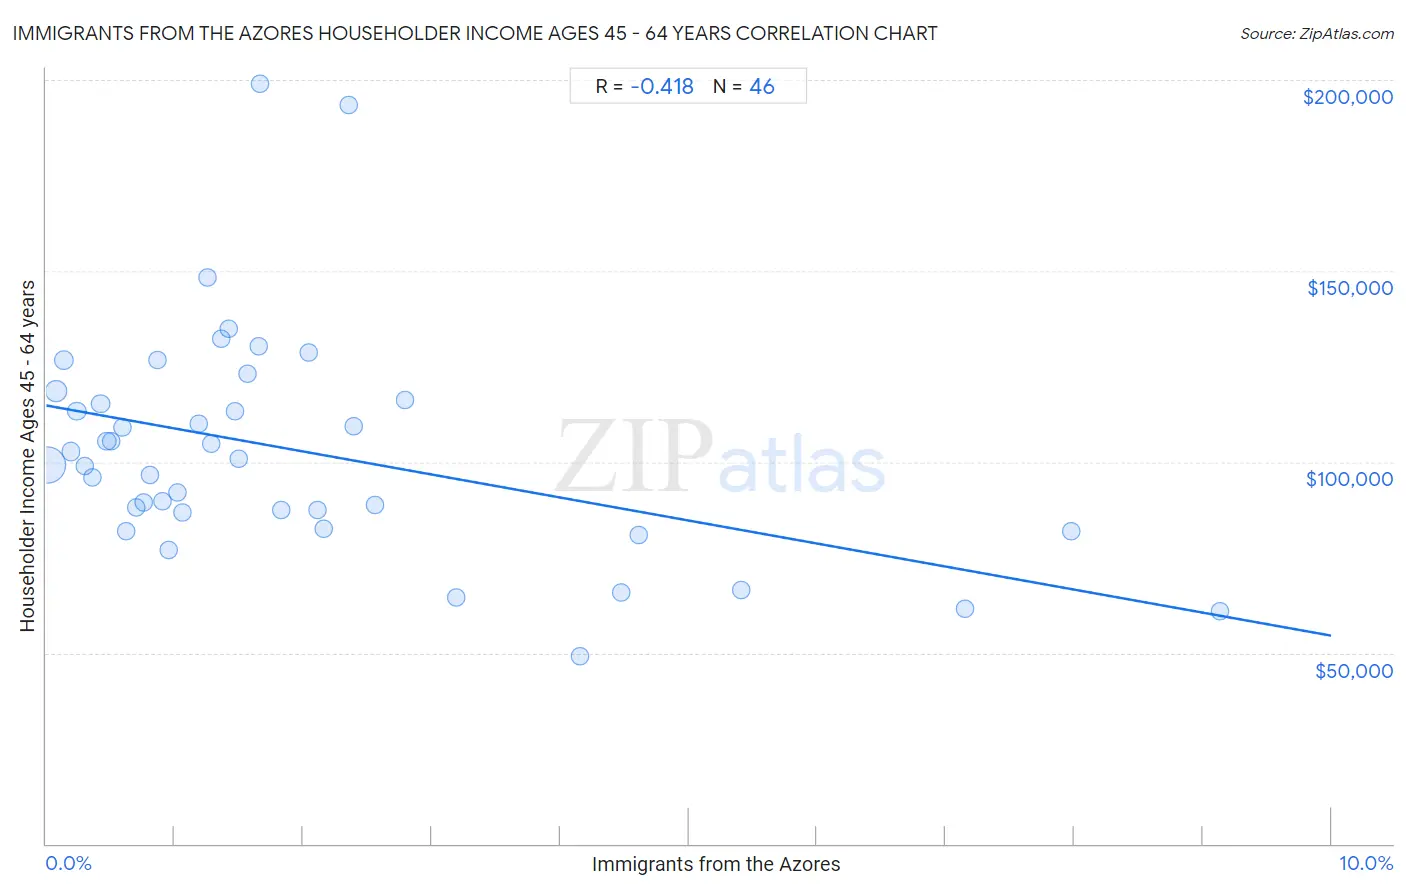 Immigrants from the Azores Householder Income Ages 45 - 64 years